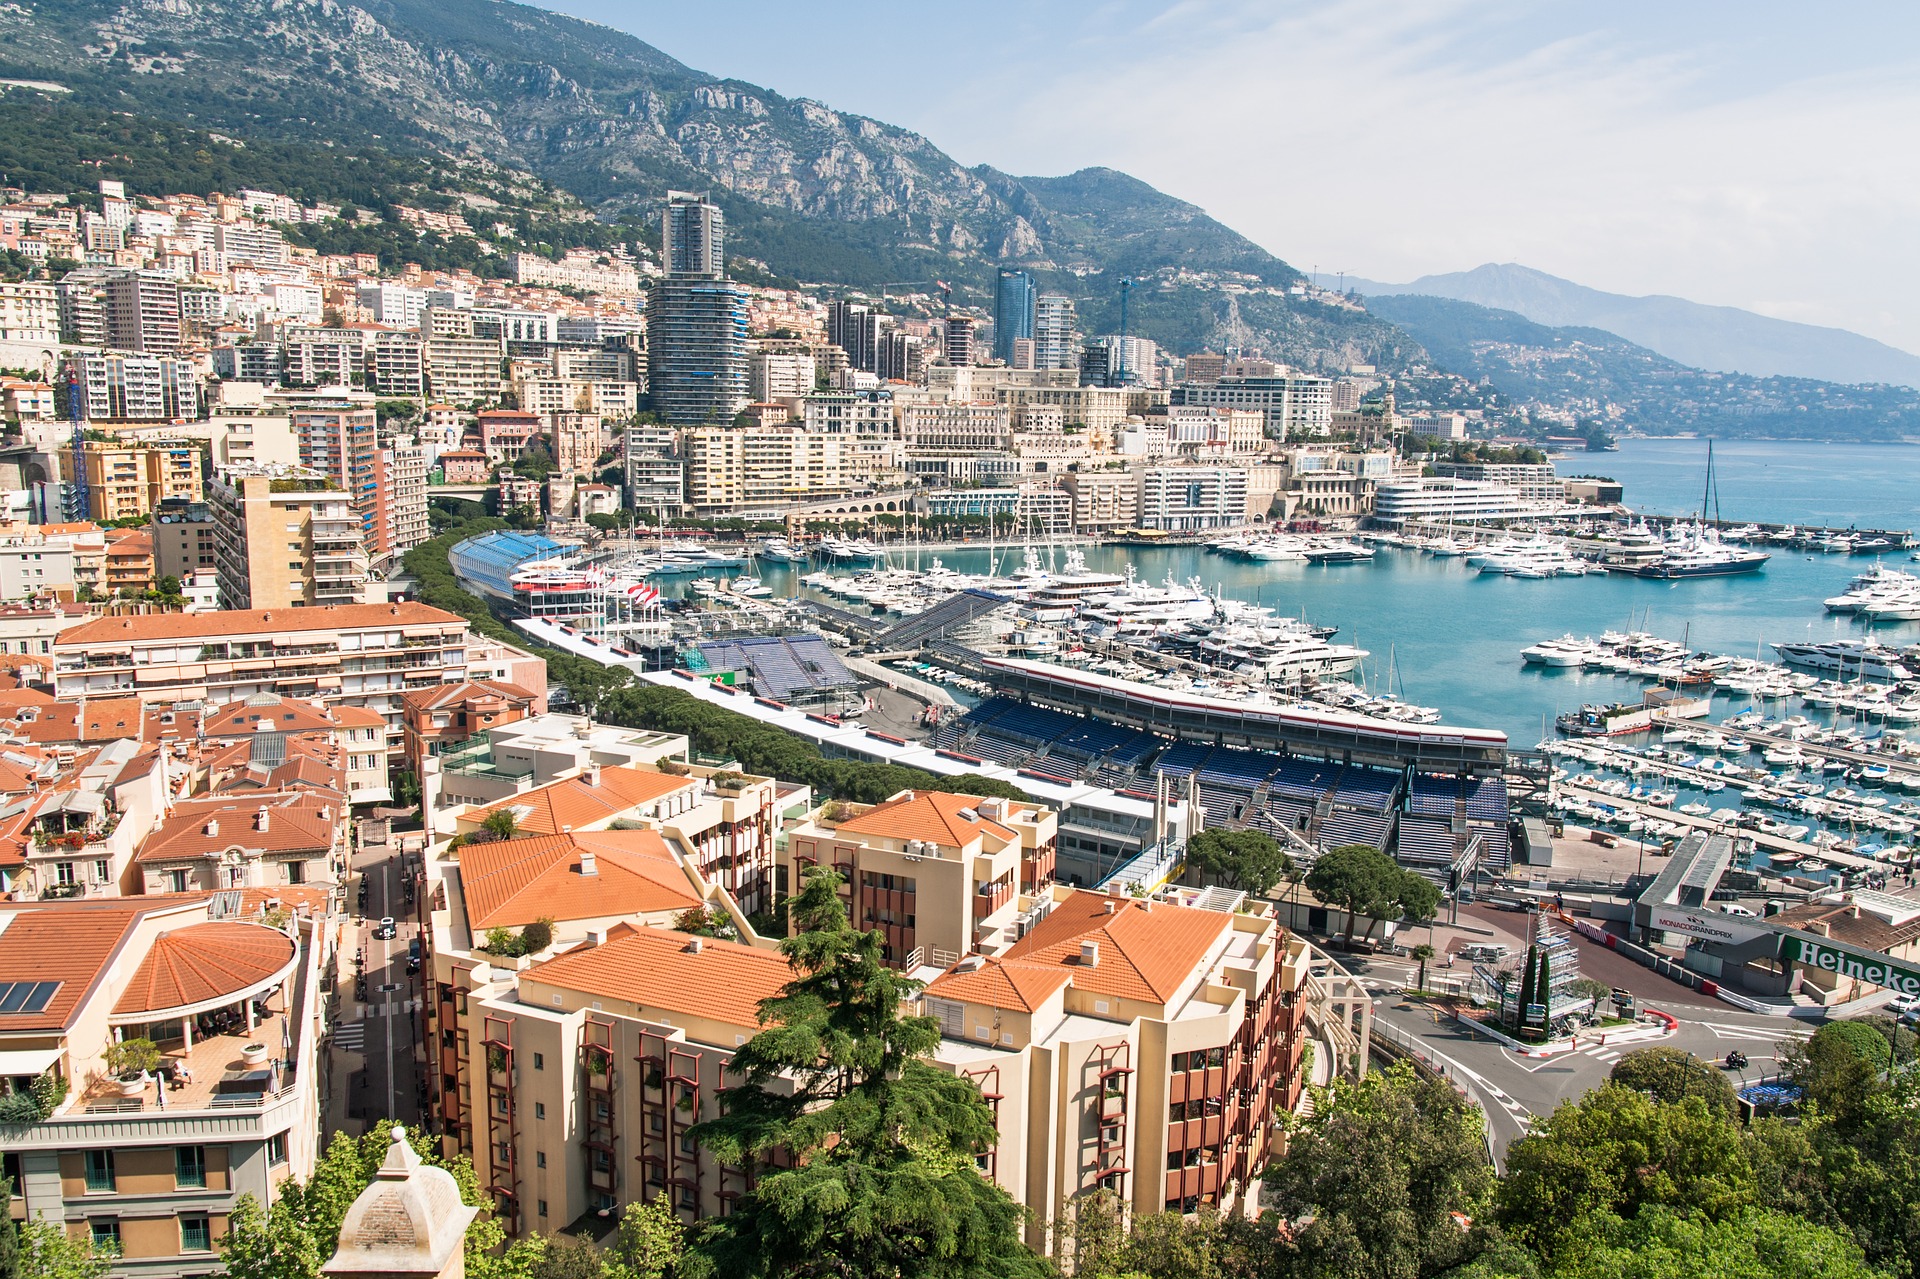 looking down on the harbor and waterfront in monaco